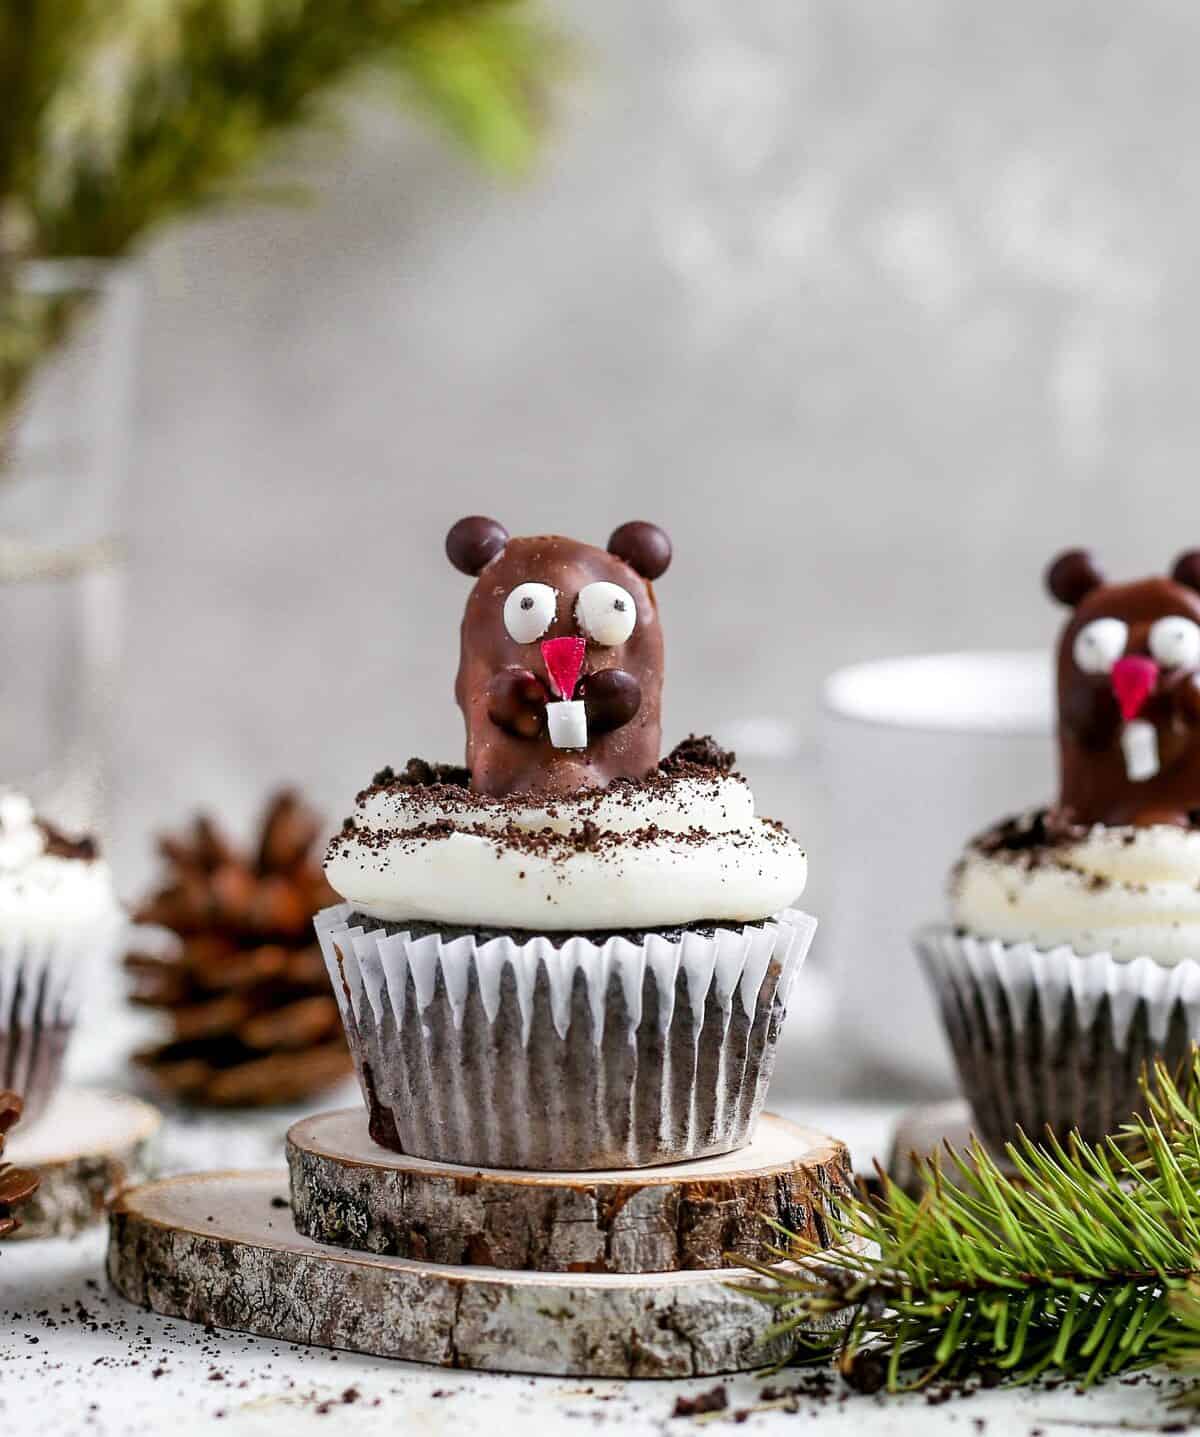 Delicious Groundhog Day cupcakes to impress guests!